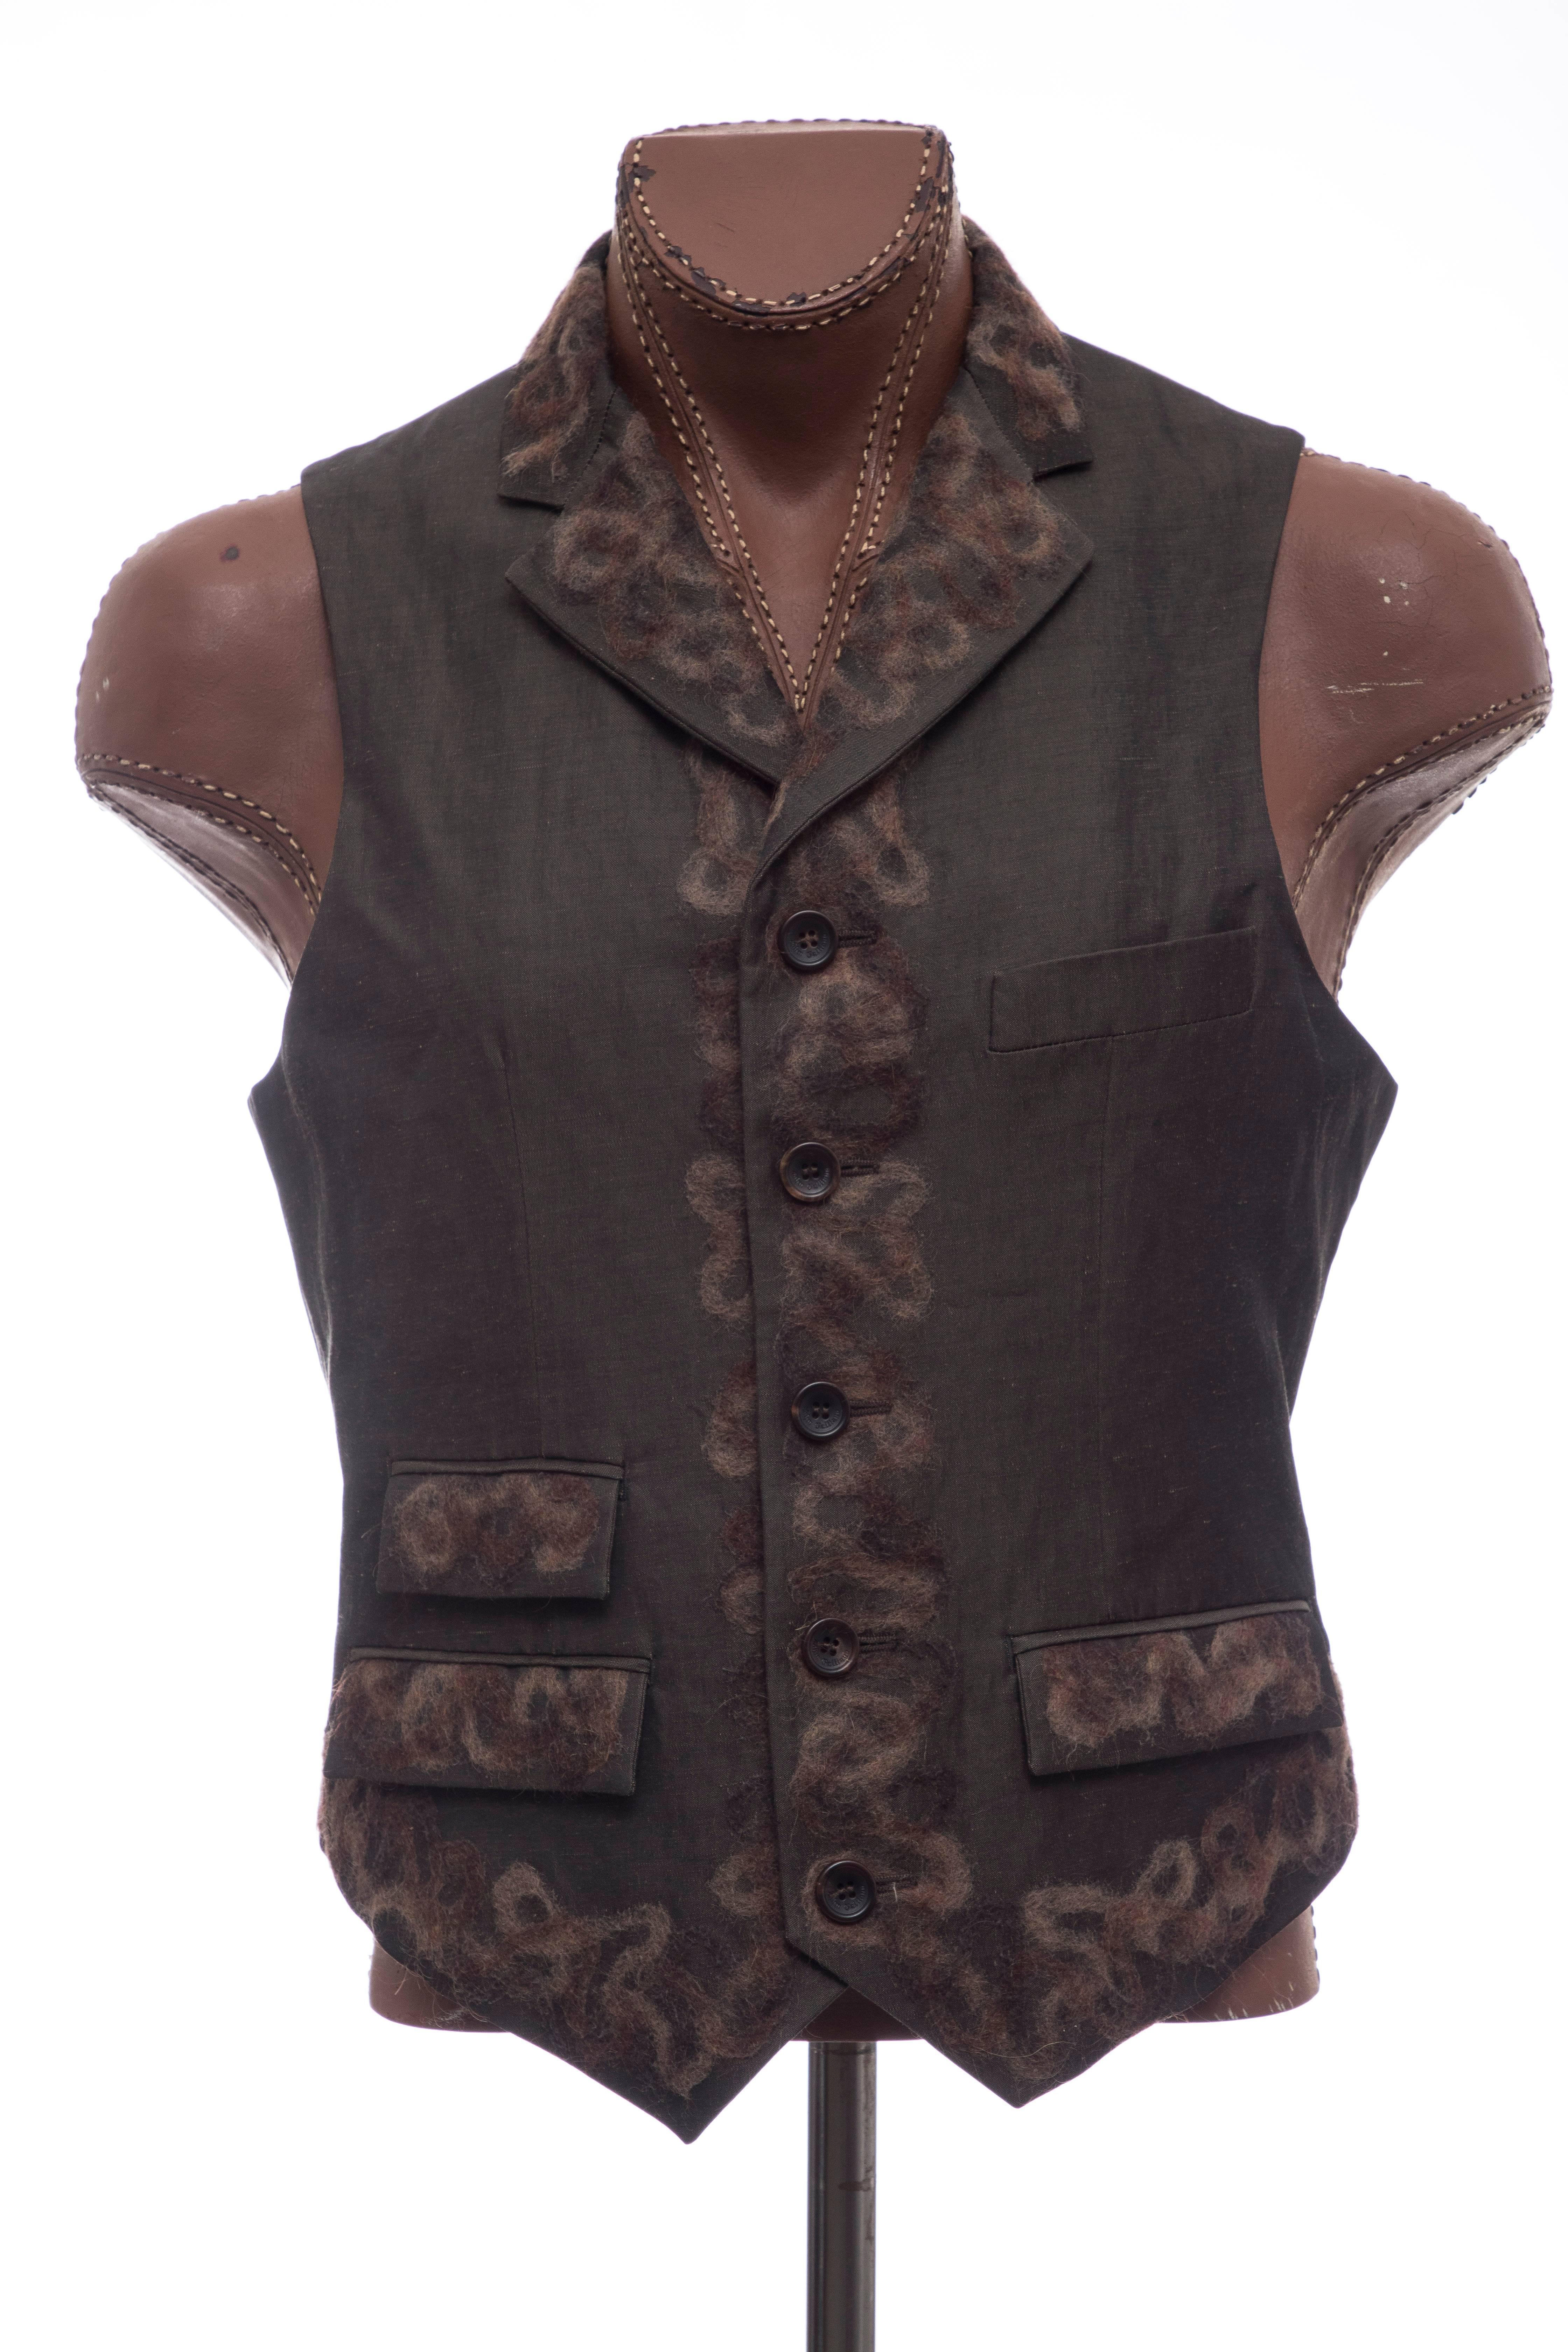 John Galliano, Fall 2008 runway men's linen-blend vest with embroidered mohair trim, notched lapels, three flap pockets and button closures.

IT. 50, US. 40

Chest: 41, Length 21.5
